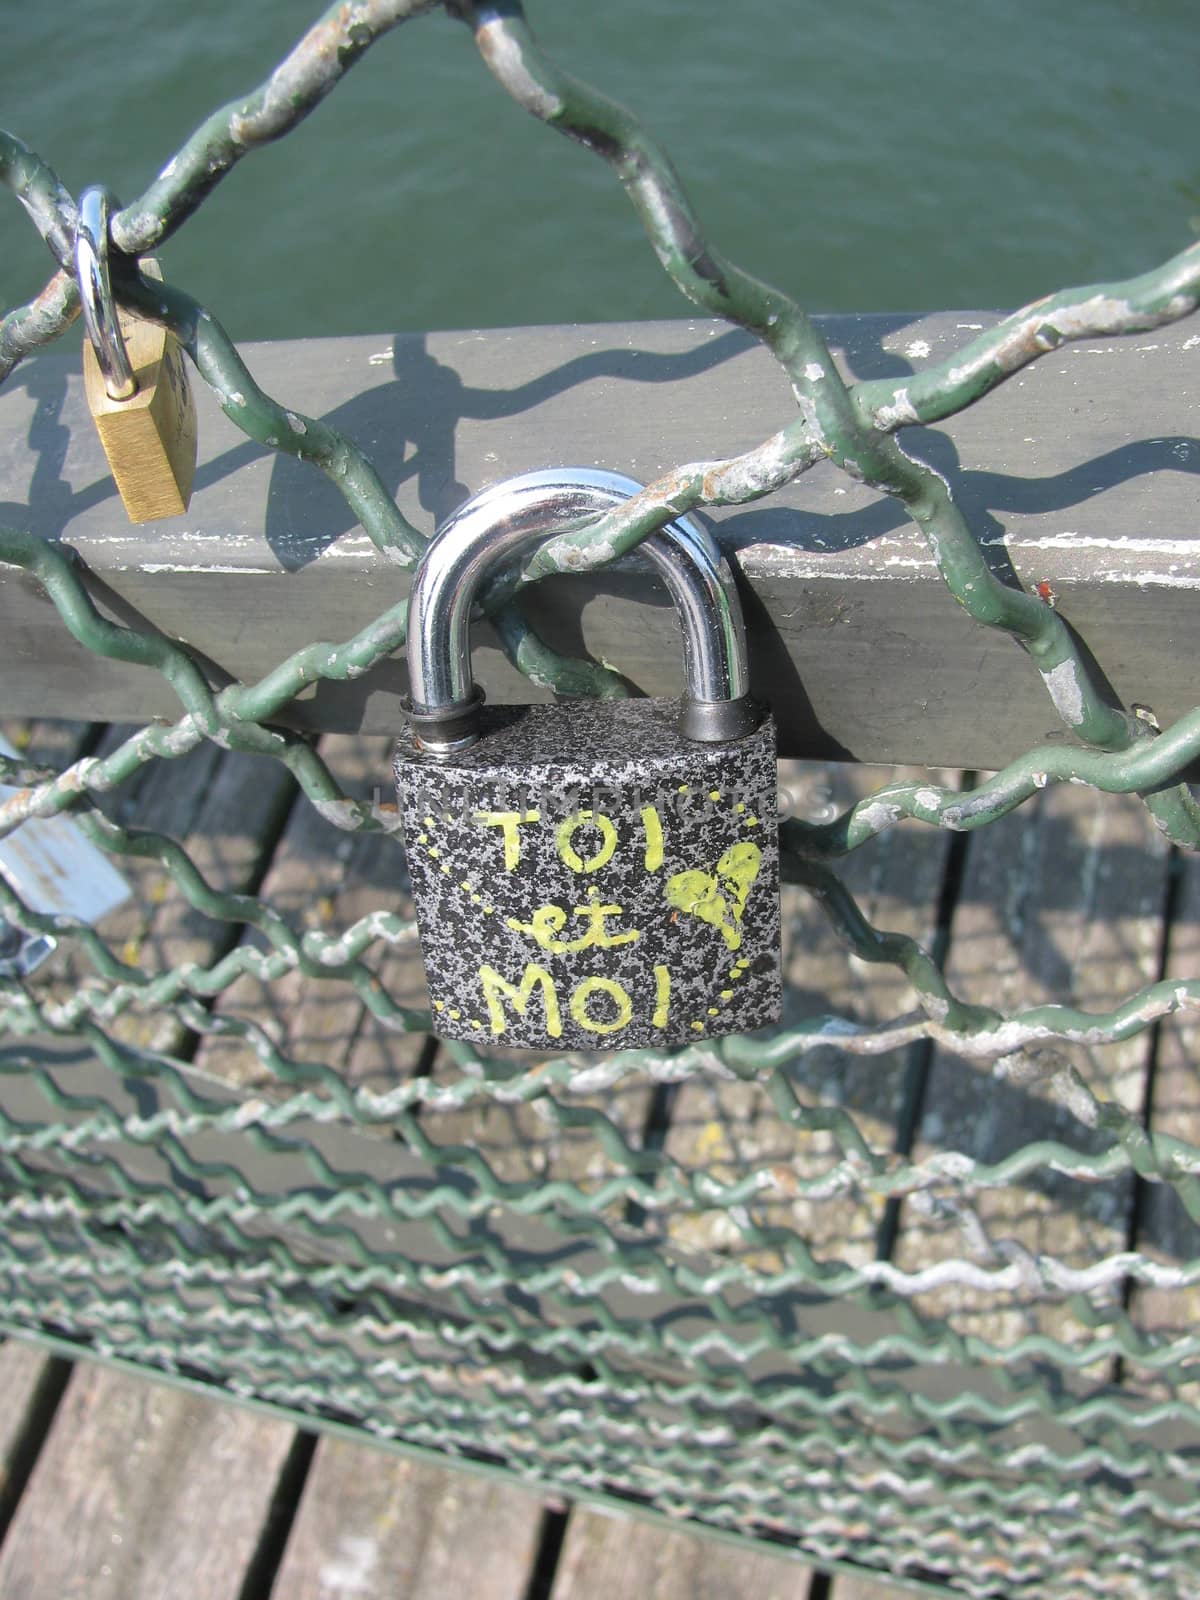 A big padlock hanging on mesh with a message : TOI et Moi , love.